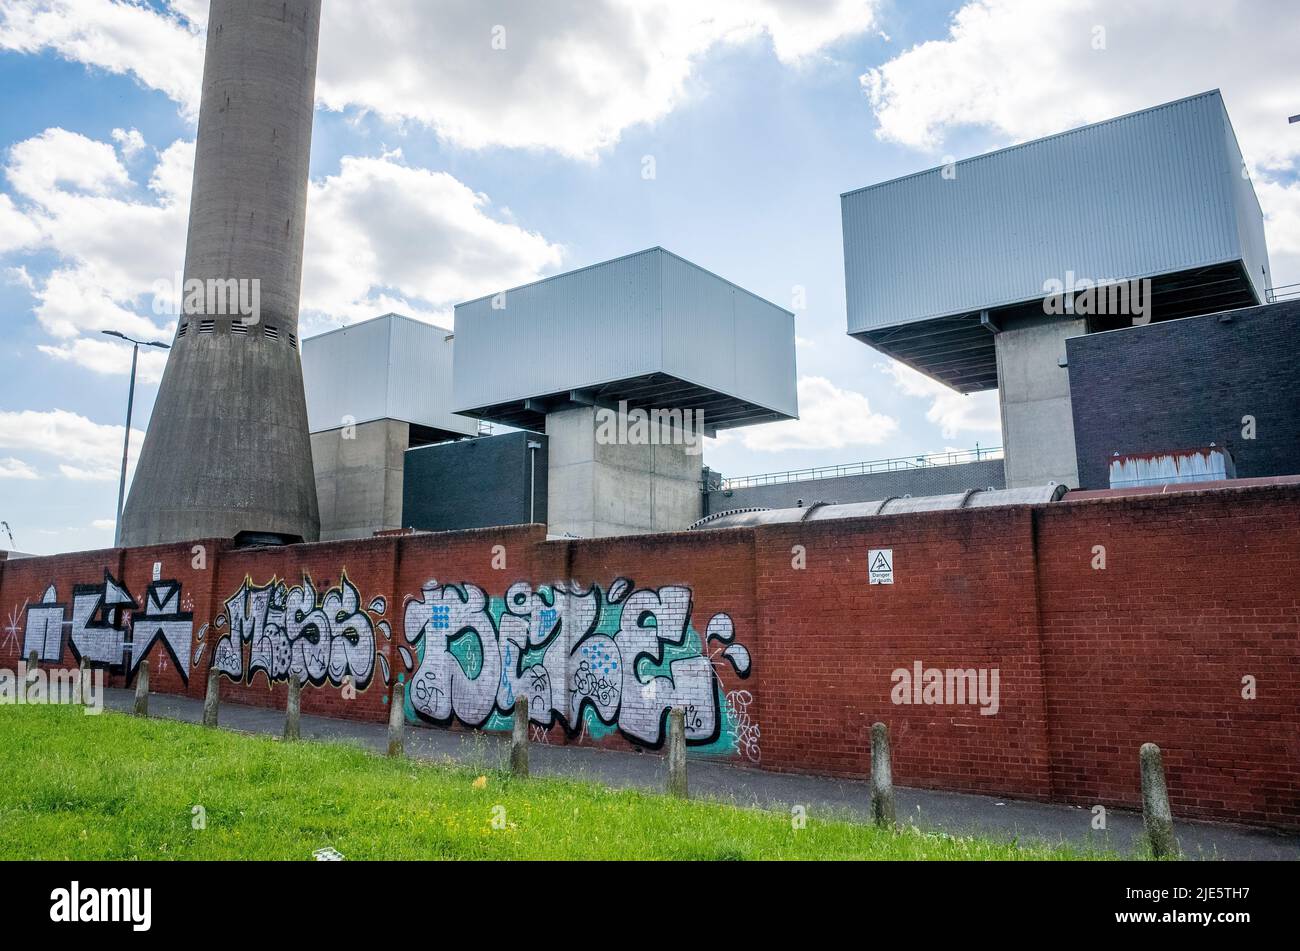 Taylors Lane Power Station owned by Uniper, situated in Willesden, north-west London. Stock Photo